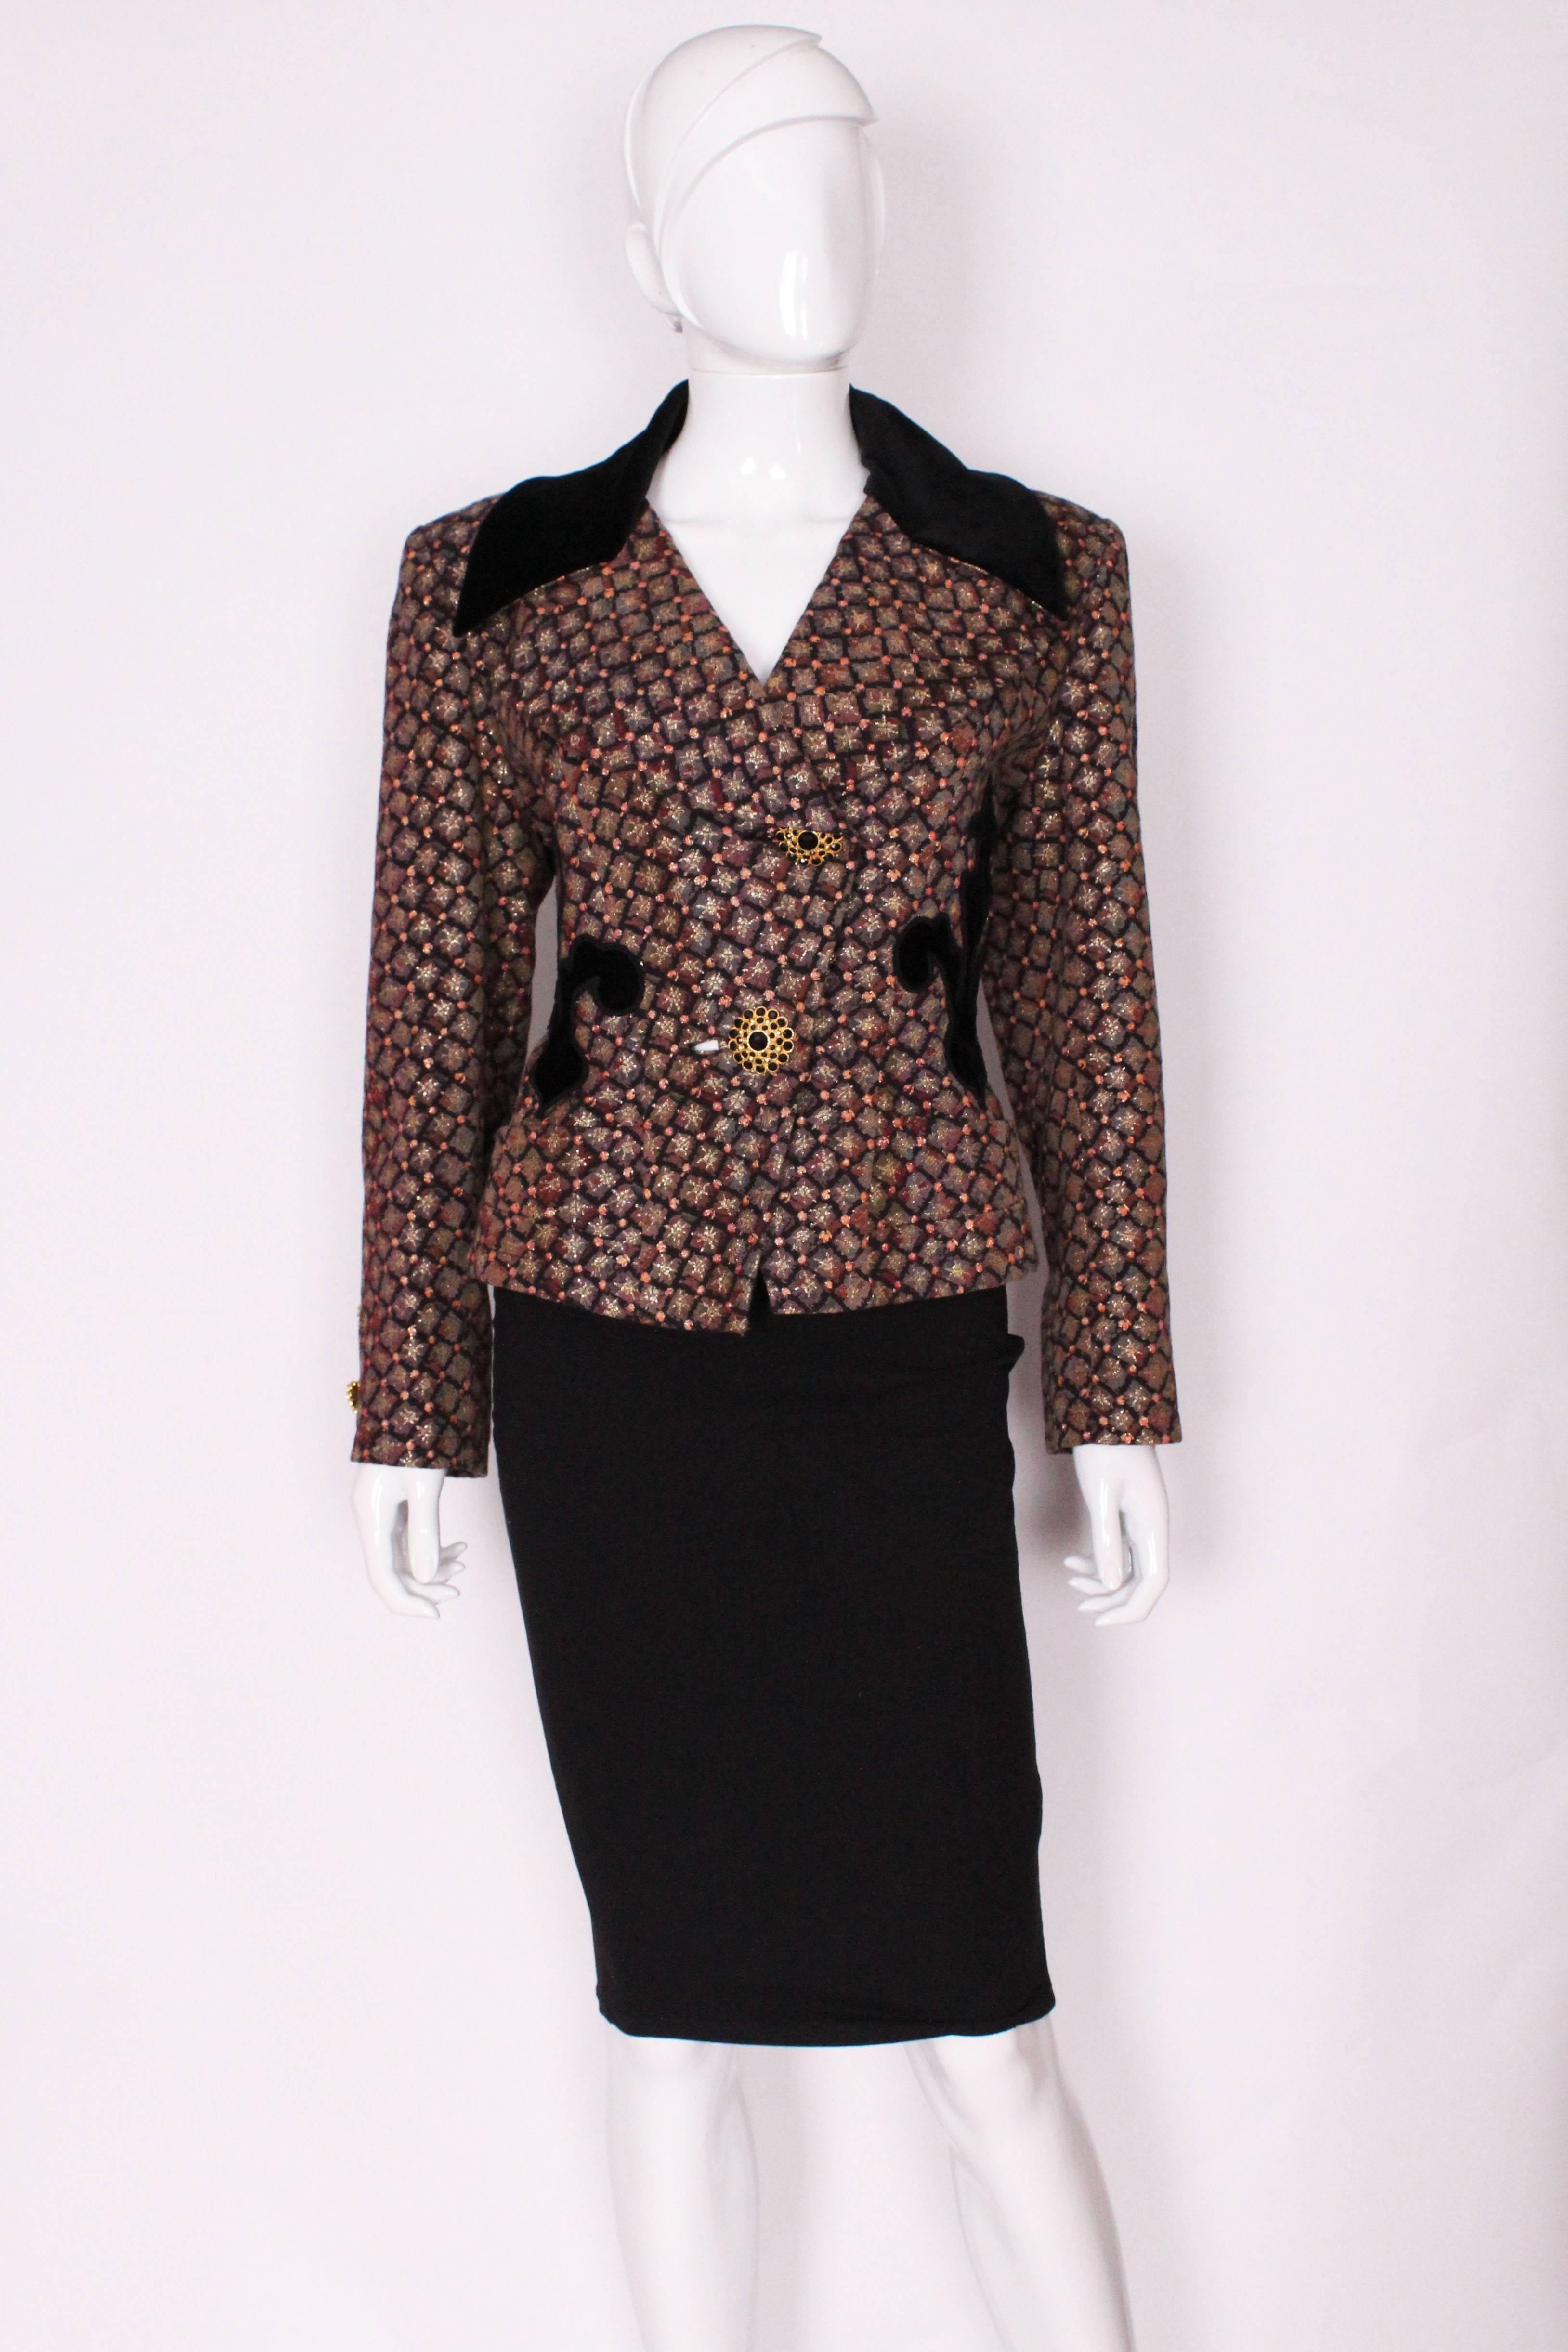 A stunning jacket by French designer Christian Lacroix. In a glorious brocade with velvet collar and detail, plus showstopper buttons. The top part of the collar is black velvet, and there is velvet detail on the front and back. The jacket closes 